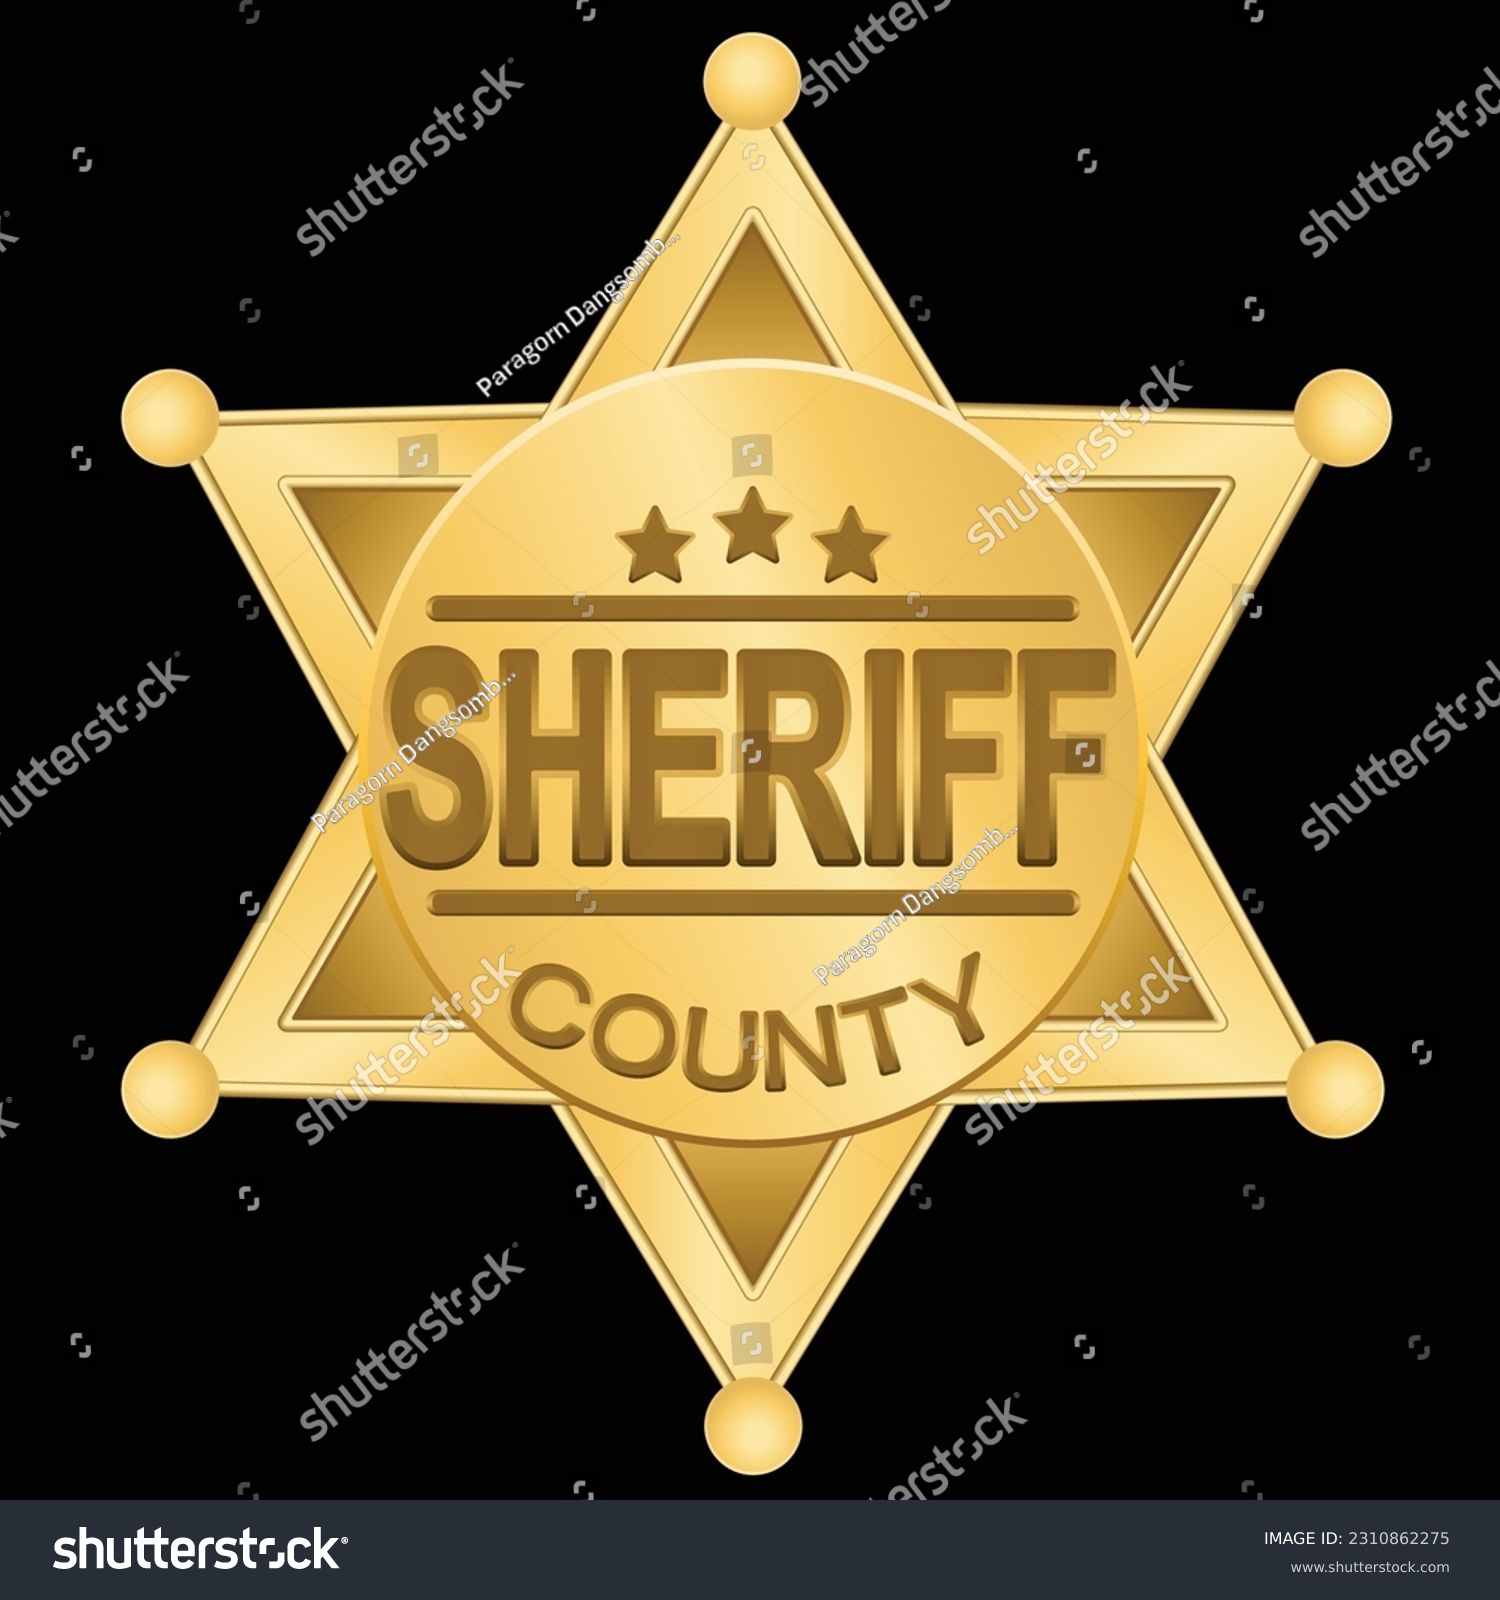 SVG of Gold Sheriff Star Badge isolated on dark background. Graphic vector svg